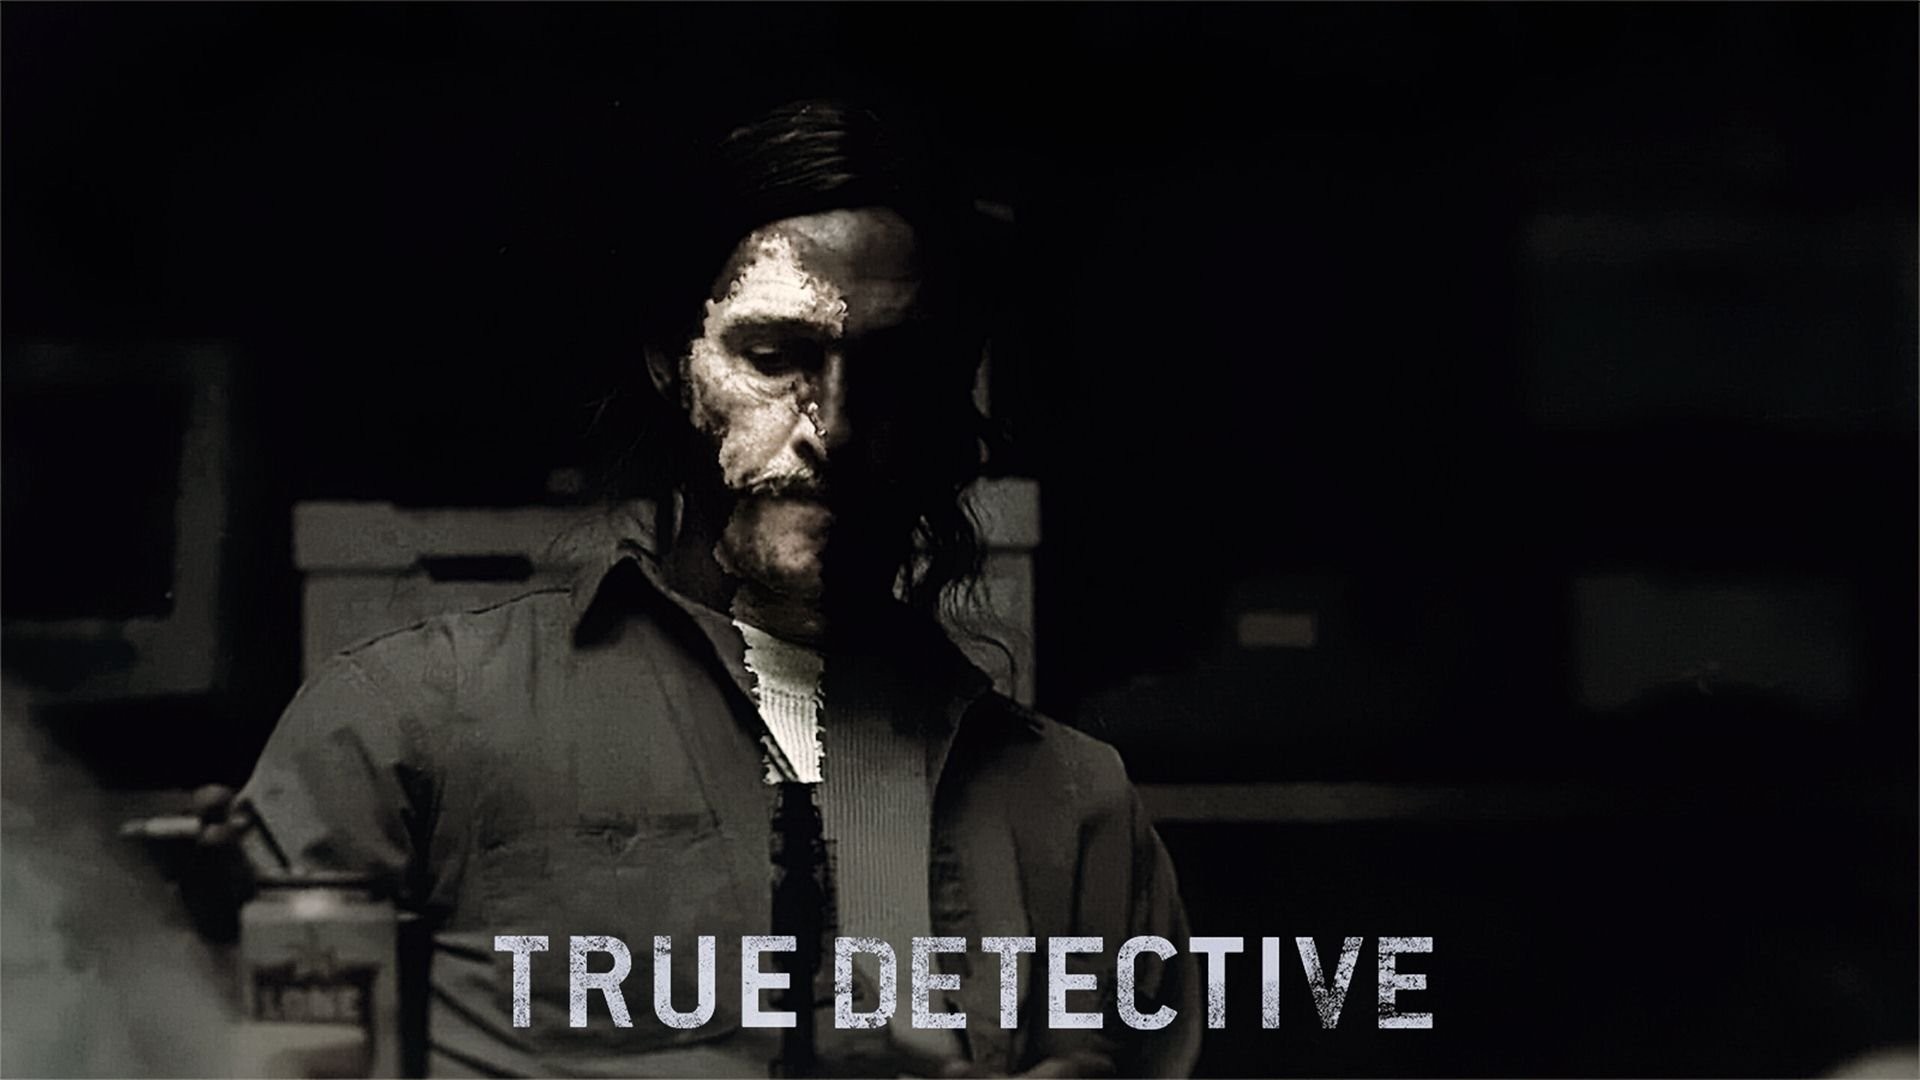 1920x1080 TRUE DETECTIVE crime drama mystery series hbo wallpaper |  |  429024 | WallpaperUP